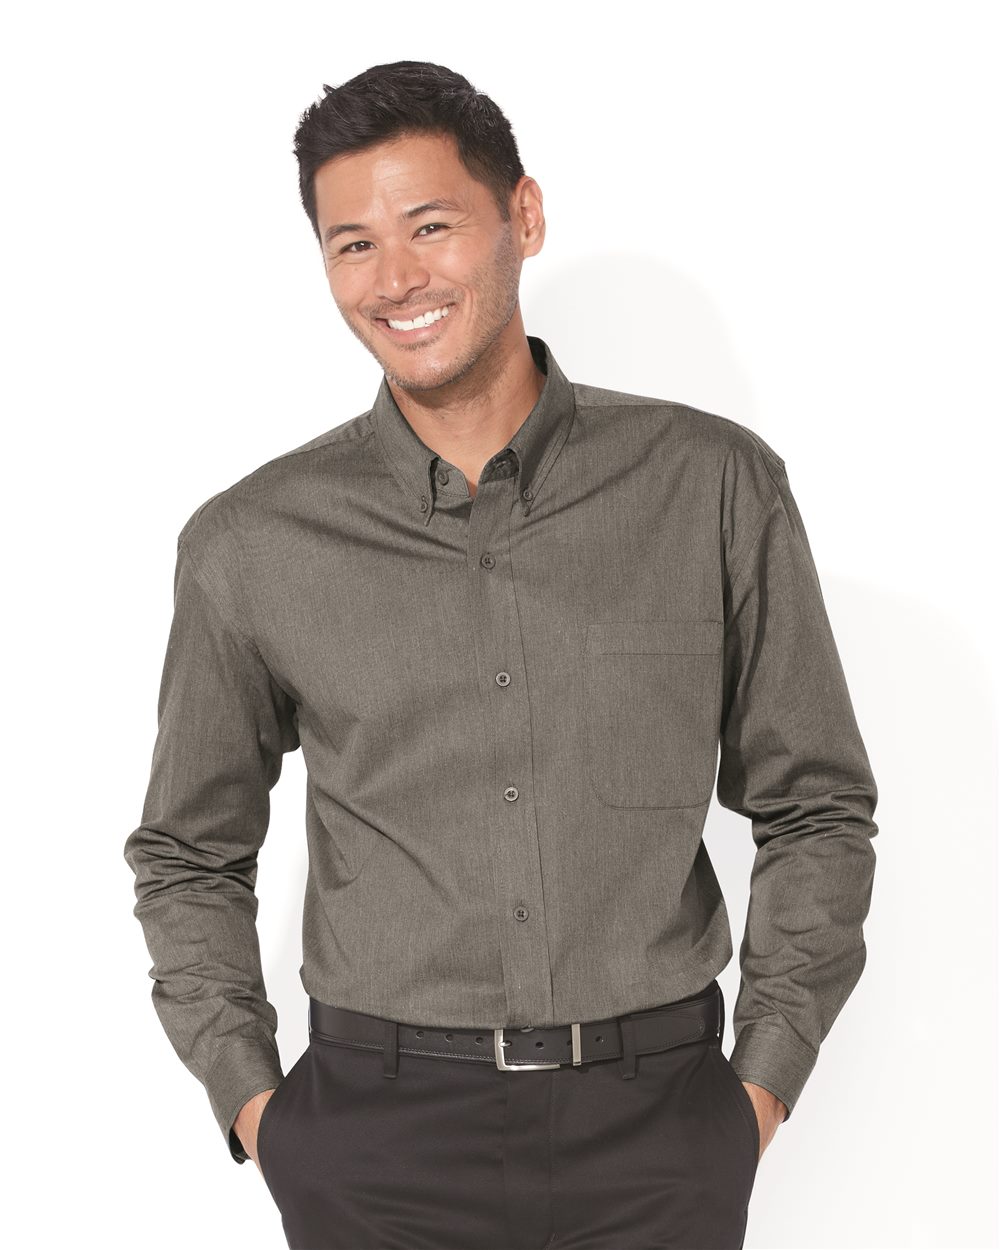 FeatherLite L/S Stain Resistant Twill Shirt 3281 